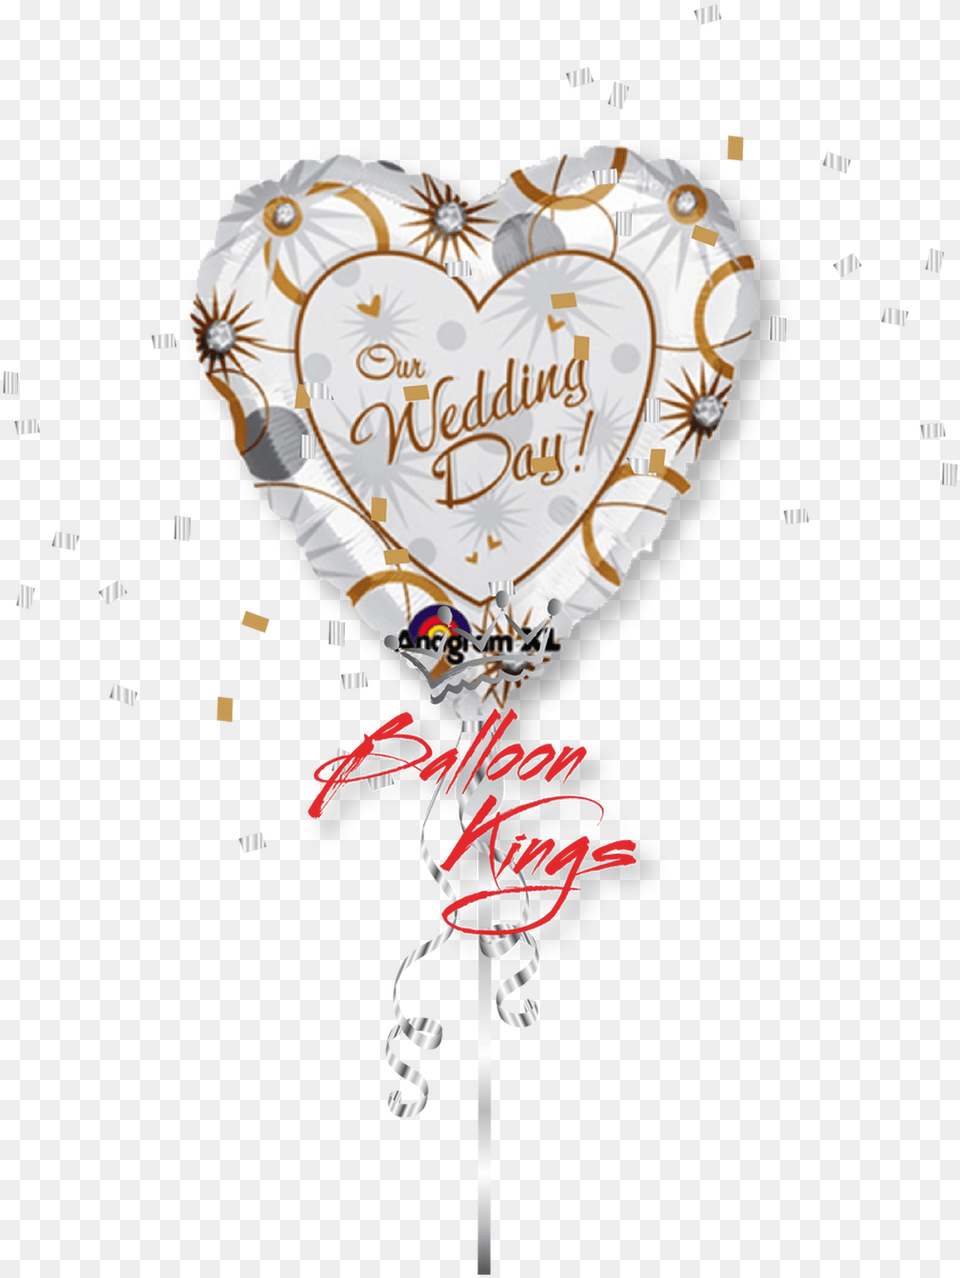 Our Wedding Day Balloon Free Png